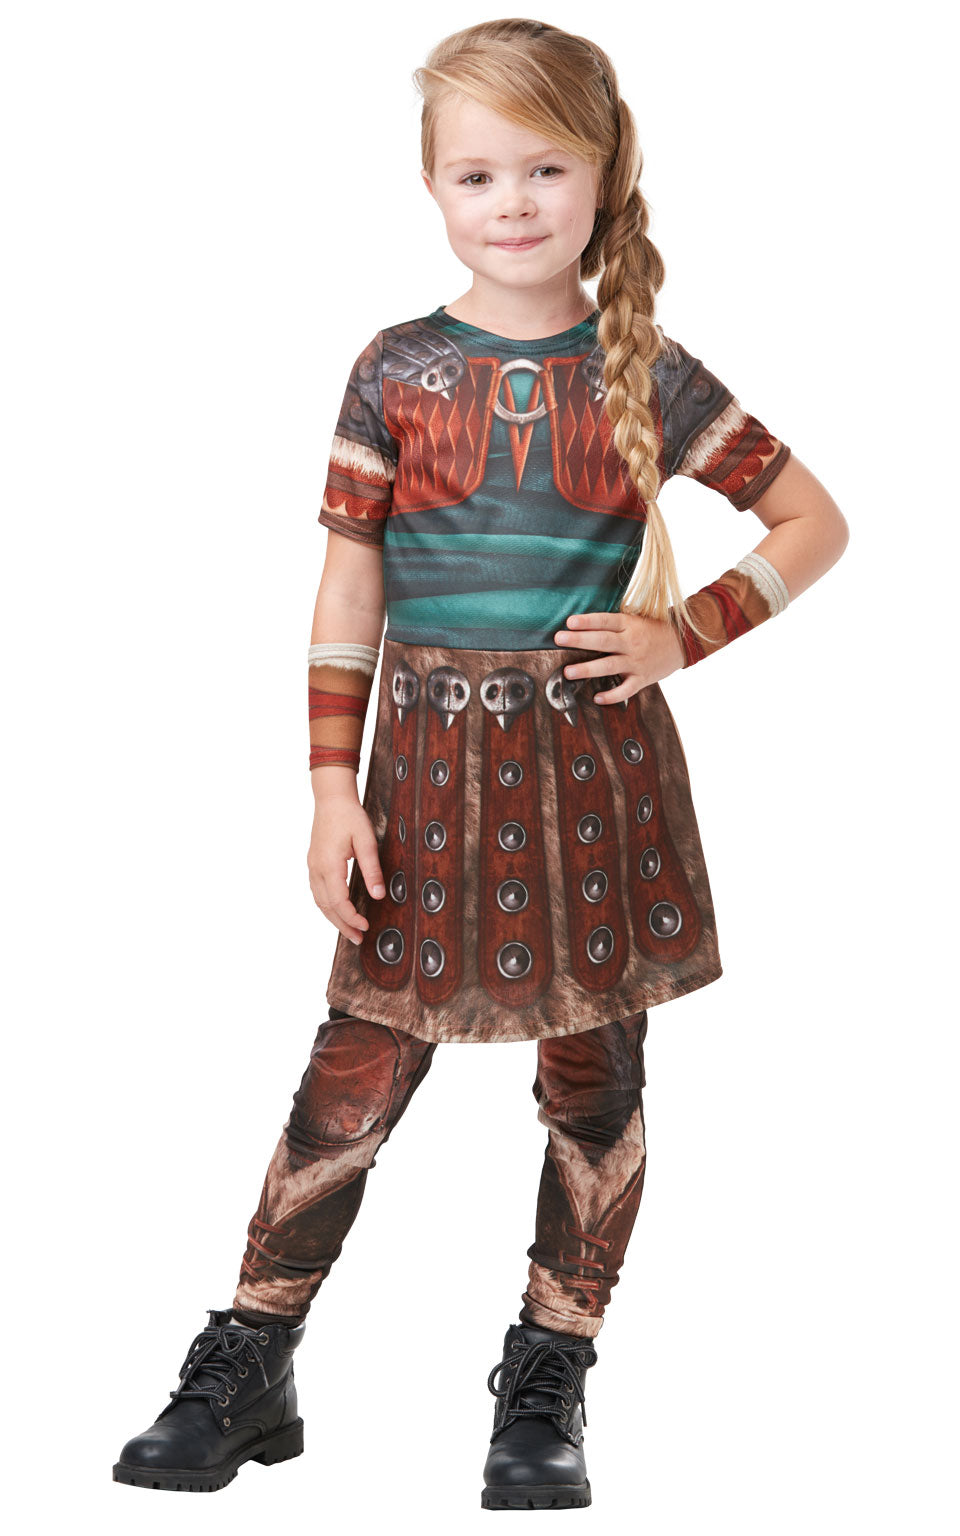 How to Train Your Dragon's Astrid Girls Costume